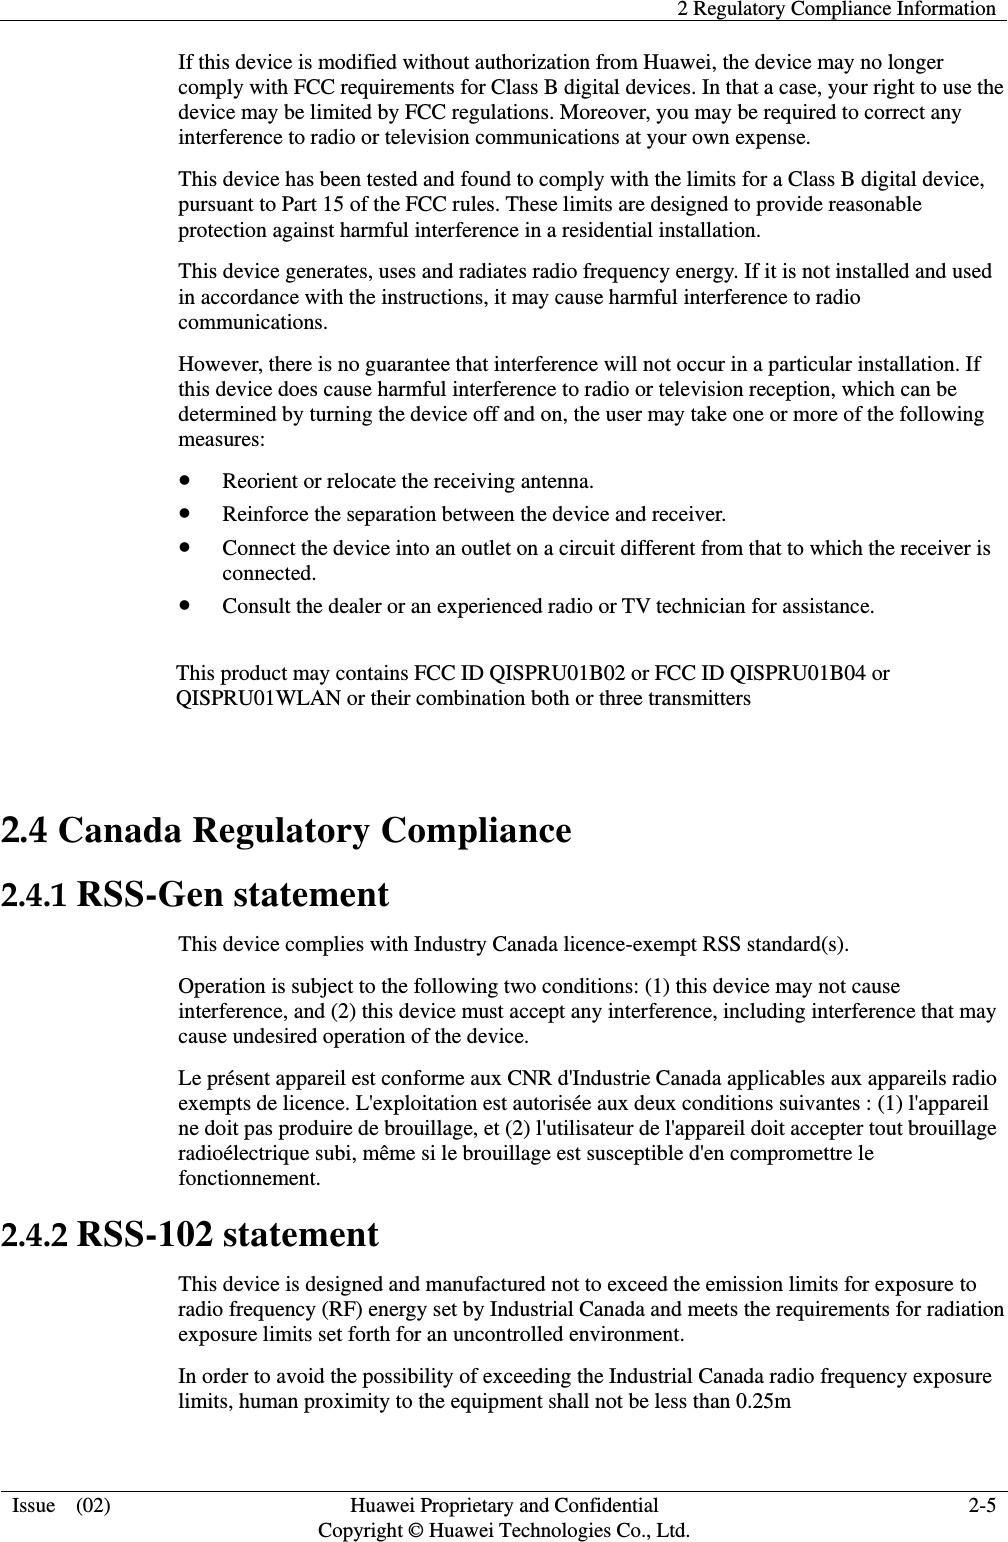   2 Regulatory Compliance Information  Issue    (02) Huawei Proprietary and Confidential                                     Copyright © Huawei Technologies Co., Ltd. 2-5  If this device is modified without authorization from Huawei, the device may no longer comply with FCC requirements for Class B digital devices. In that a case, your right to use the device may be limited by FCC regulations. Moreover, you may be required to correct any interference to radio or television communications at your own expense. This device has been tested and found to comply with the limits for a Class B digital device, pursuant to Part 15 of the FCC rules. These limits are designed to provide reasonable protection against harmful interference in a residential installation. This device generates, uses and radiates radio frequency energy. If it is not installed and used in accordance with the instructions, it may cause harmful interference to radio communications. However, there is no guarantee that interference will not occur in a particular installation. If this device does cause harmful interference to radio or television reception, which can be determined by turning the device off and on, the user may take one or more of the following measures:  Reorient or relocate the receiving antenna.  Reinforce the separation between the device and receiver.  Connect the device into an outlet on a circuit different from that to which the receiver is connected.  Consult the dealer or an experienced radio or TV technician for assistance.  This product may contains FCC ID QISPRU01B02 or FCC ID QISPRU01B04 or QISPRU01WLAN or their combination both or three transmitters  2.4 Canada Regulatory Compliance 2.4.1 RSS-Gen statement This device complies with Industry Canada licence-exempt RSS standard(s). Operation is subject to the following two conditions: (1) this device may not cause interference, and (2) this device must accept any interference, including interference that may cause undesired operation of the device. Le présent appareil est conforme aux CNR d&apos;Industrie Canada applicables aux appareils radio exempts de licence. L&apos;exploitation est autorisée aux deux conditions suivantes : (1) l&apos;appareil ne doit pas produire de brouillage, et (2) l&apos;utilisateur de l&apos;appareil doit accepter tout brouillage radioélectrique subi, même si le brouillage est susceptible d&apos;en compromettre le fonctionnement. 2.4.2 RSS-102 statement This device is designed and manufactured not to exceed the emission limits for exposure to radio frequency (RF) energy set by Industrial Canada and meets the requirements for radiation exposure limits set forth for an uncontrolled environment. In order to avoid the possibility of exceeding the Industrial Canada radio frequency exposure limits, human proximity to the equipment shall not be less than 0.25m 